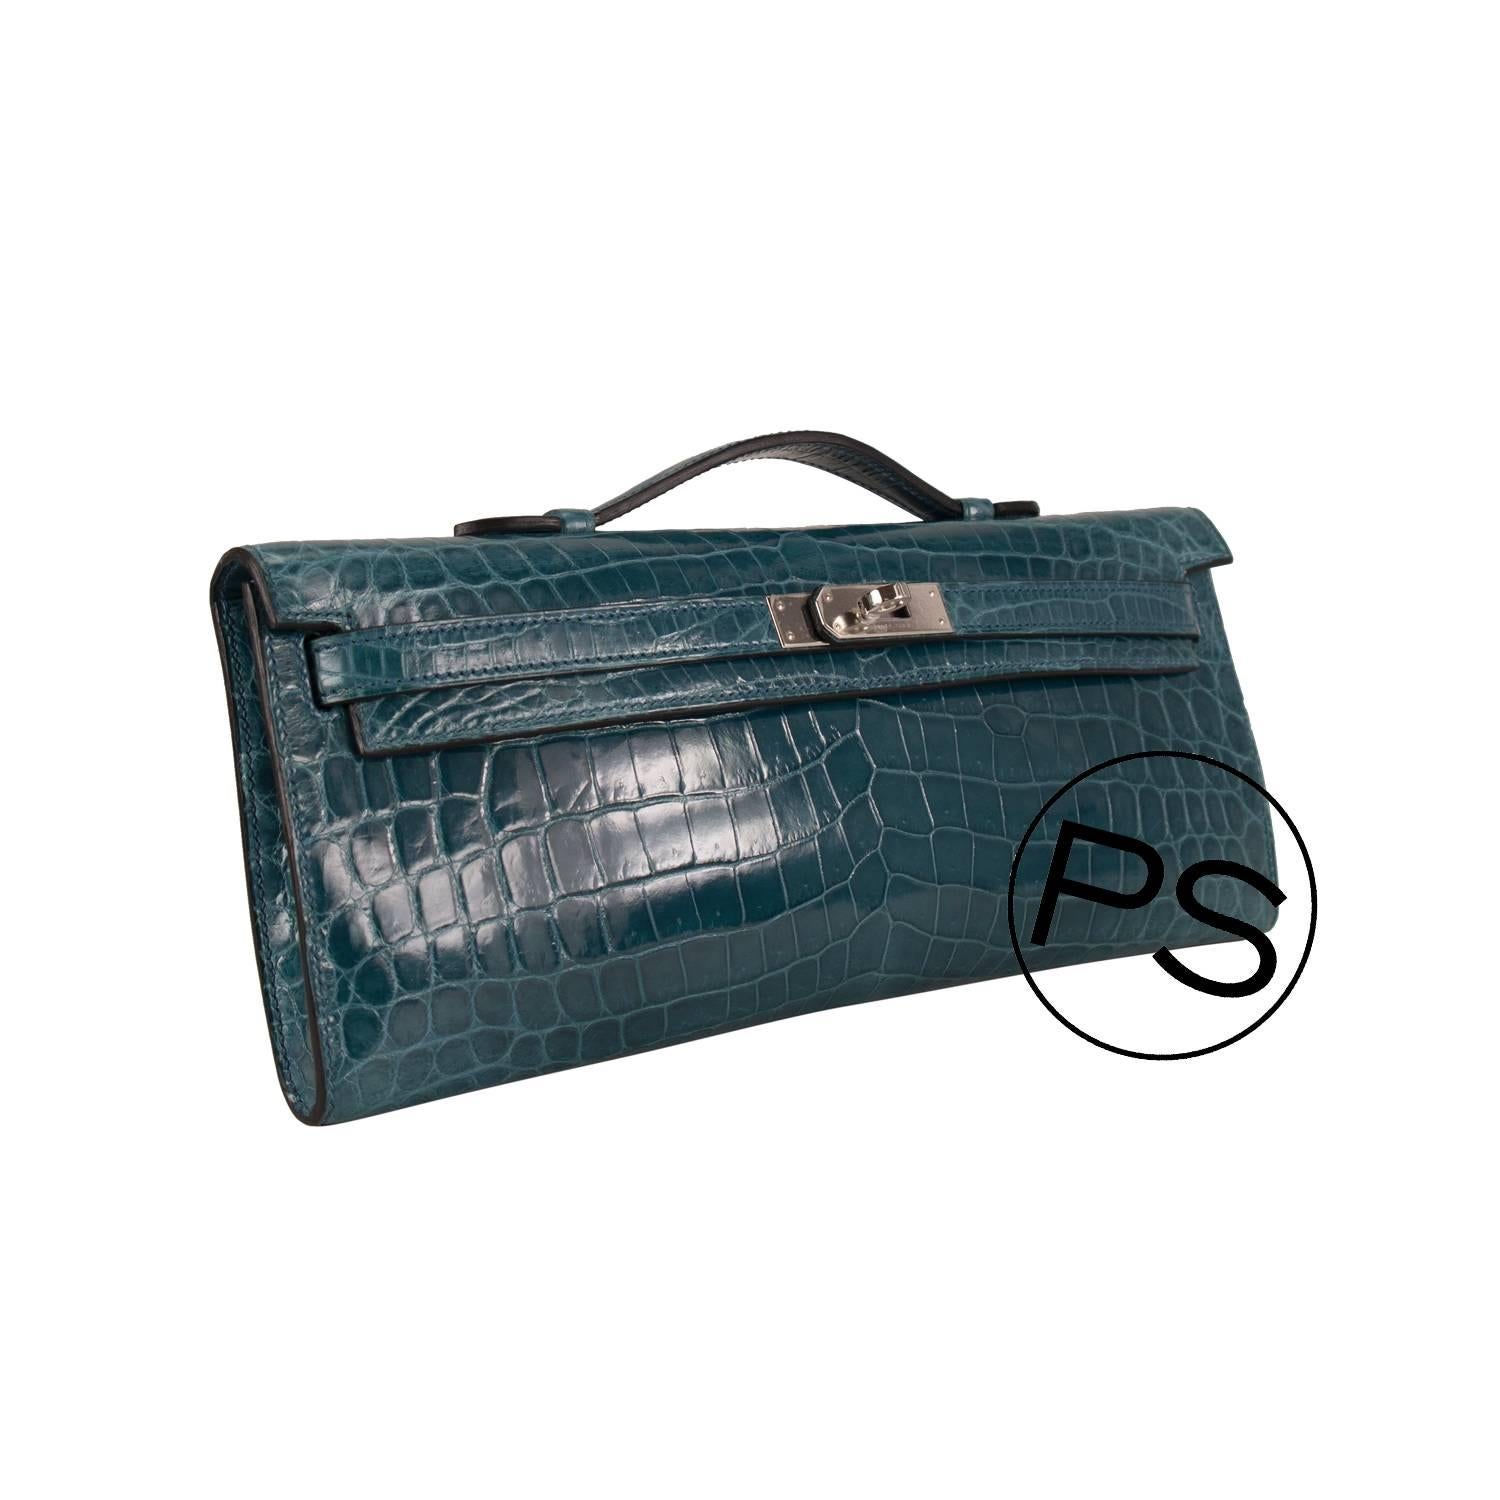 Hermes  Clutch Kelly Cut Crocodile Niloticus Colvert Palladium Hardware 2015.

Bought it in Hermes store in 2015.

Pre-owned and never used.

Model: Kelly Cut.

Color: Black.

Size: 3.5x13.5x2cm (LxHxW)

Details:

With the protective